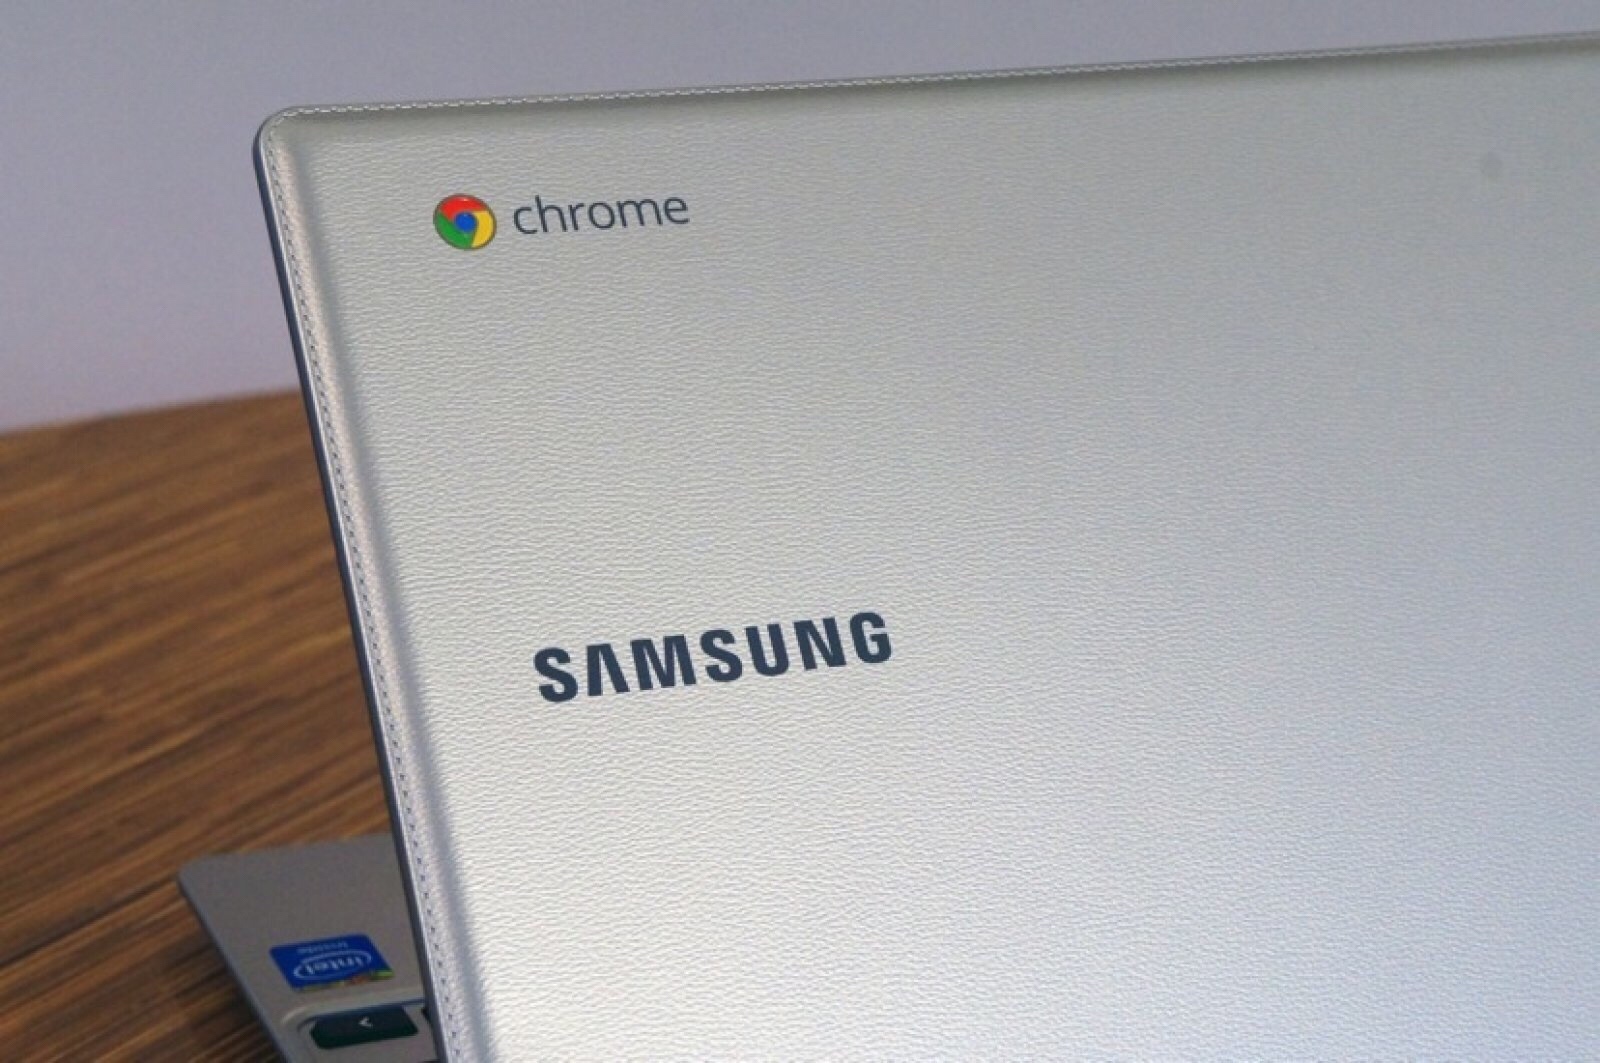 Chrome’s popular pull-to-refresh feature is making its way to Chromebooks